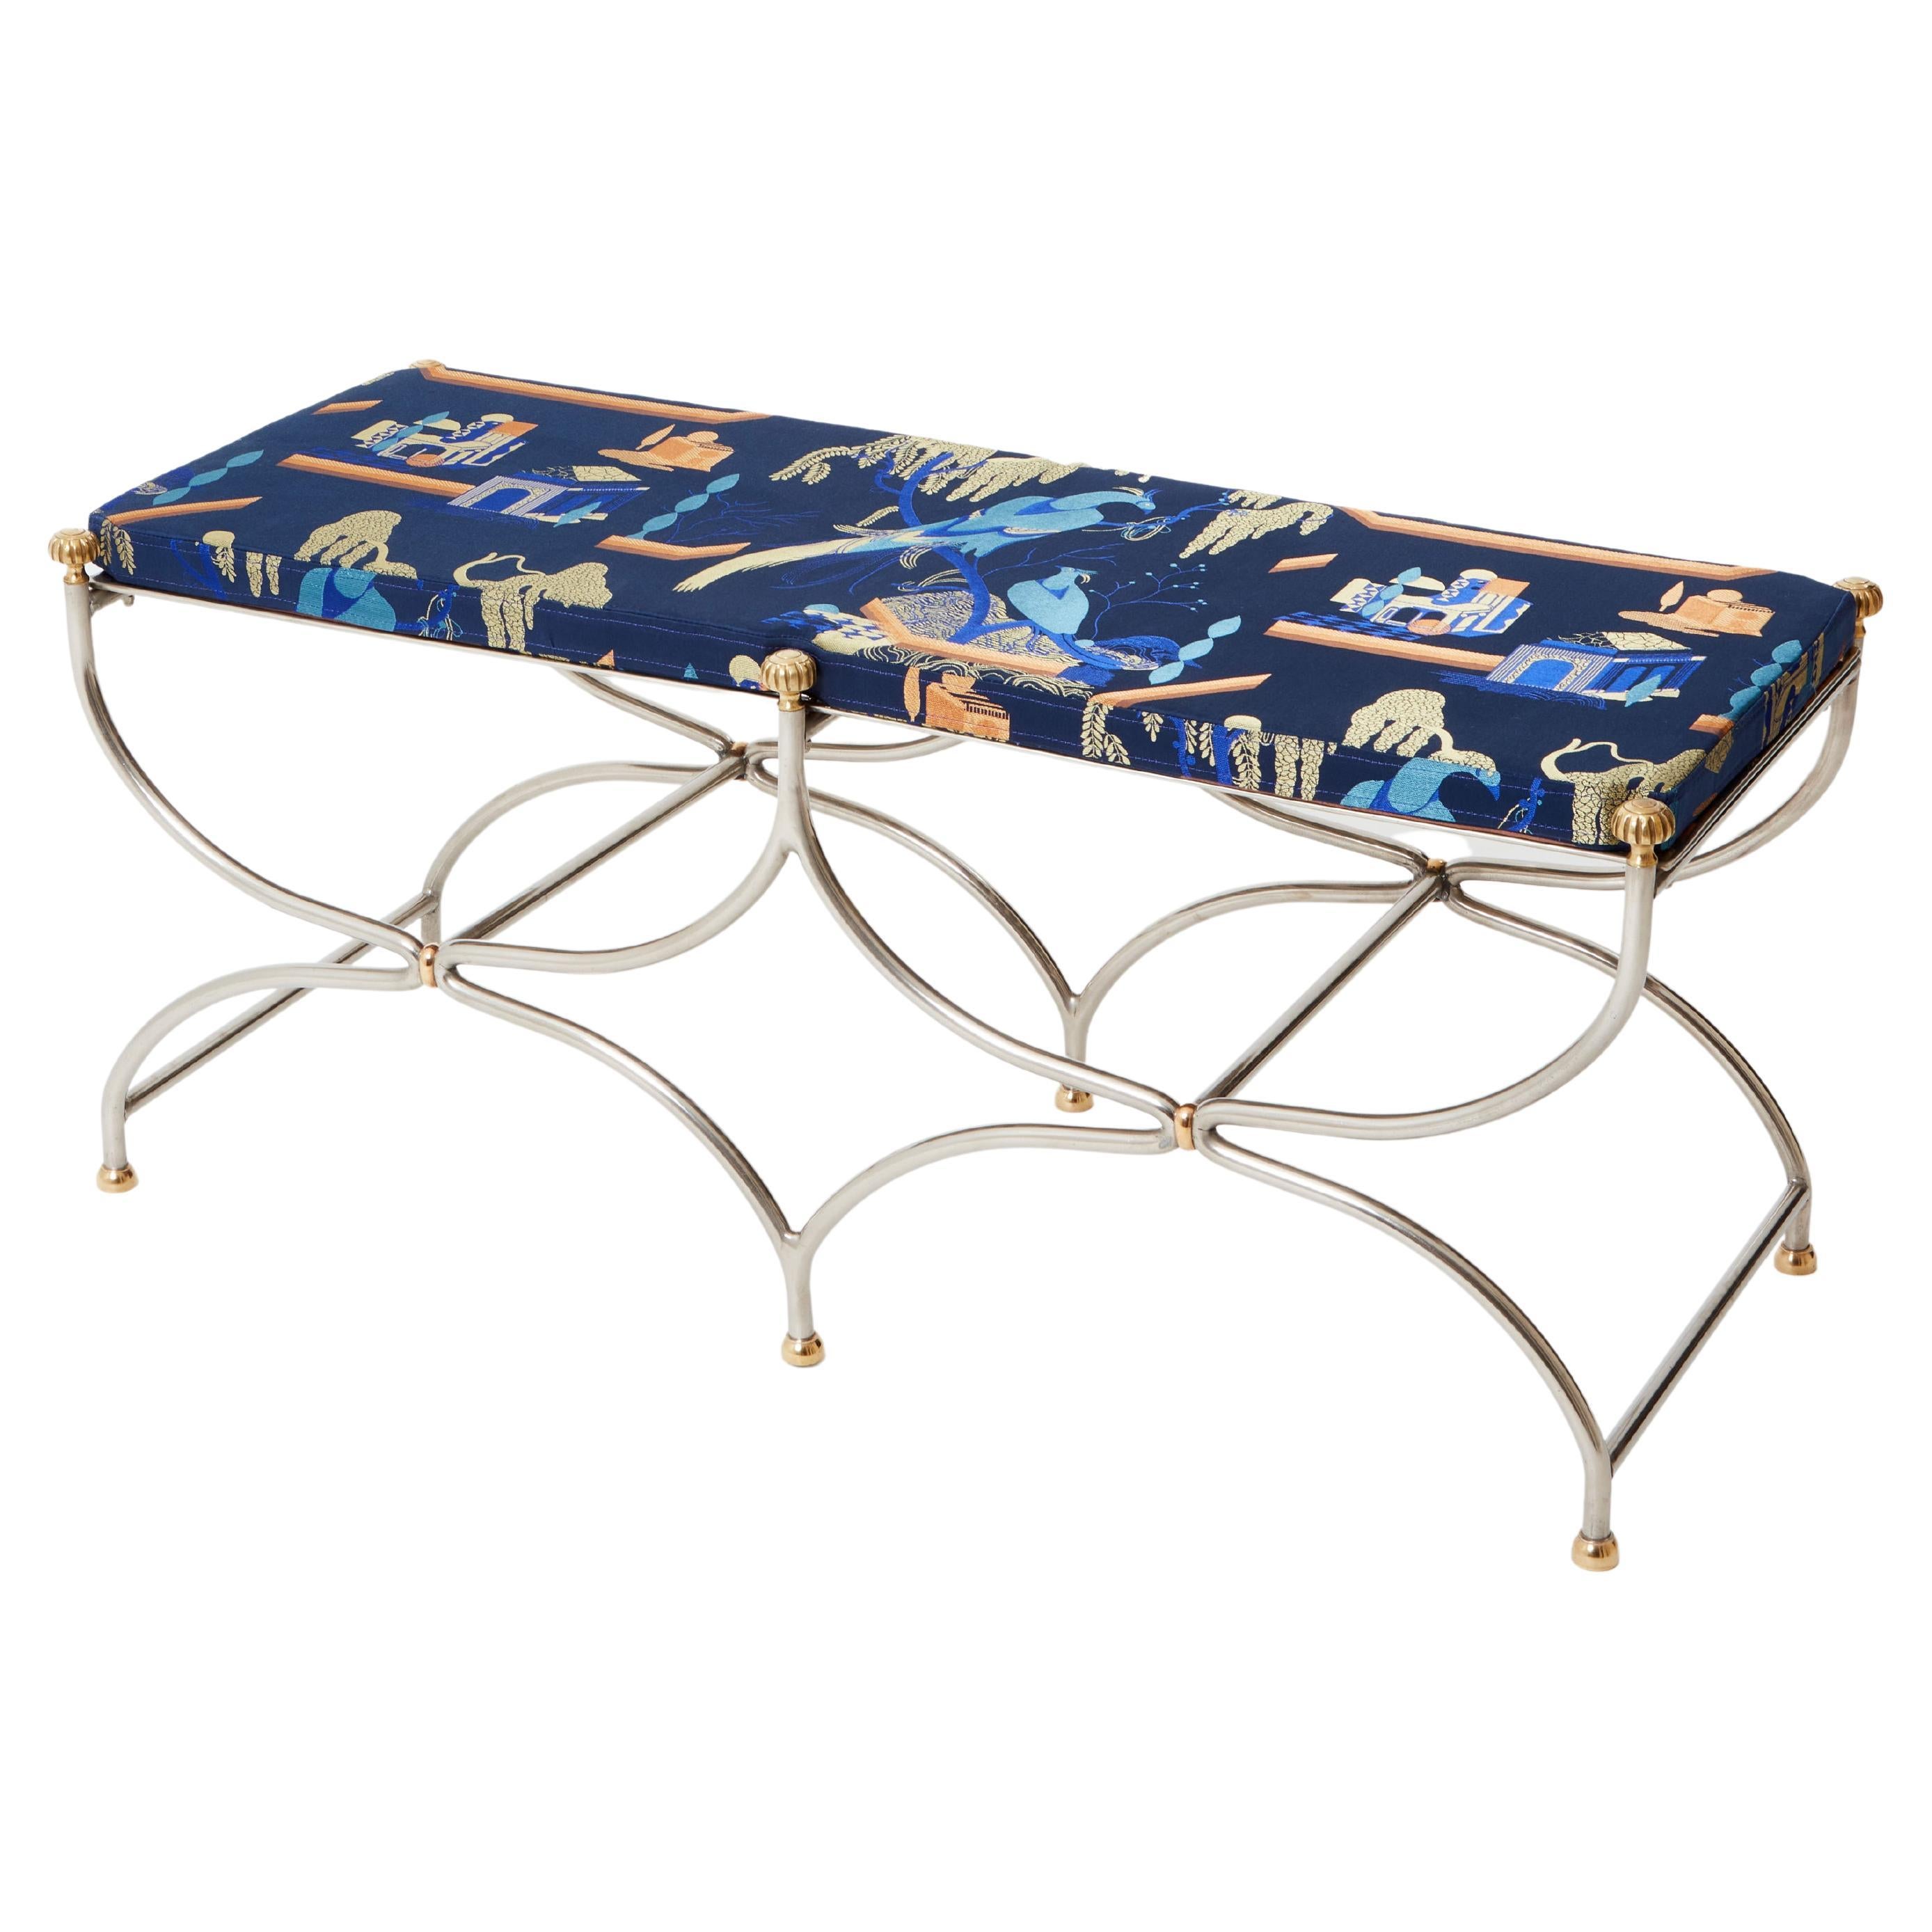 Neoclassical steel brass curule bench by Maison Jansen 1960s For Sale